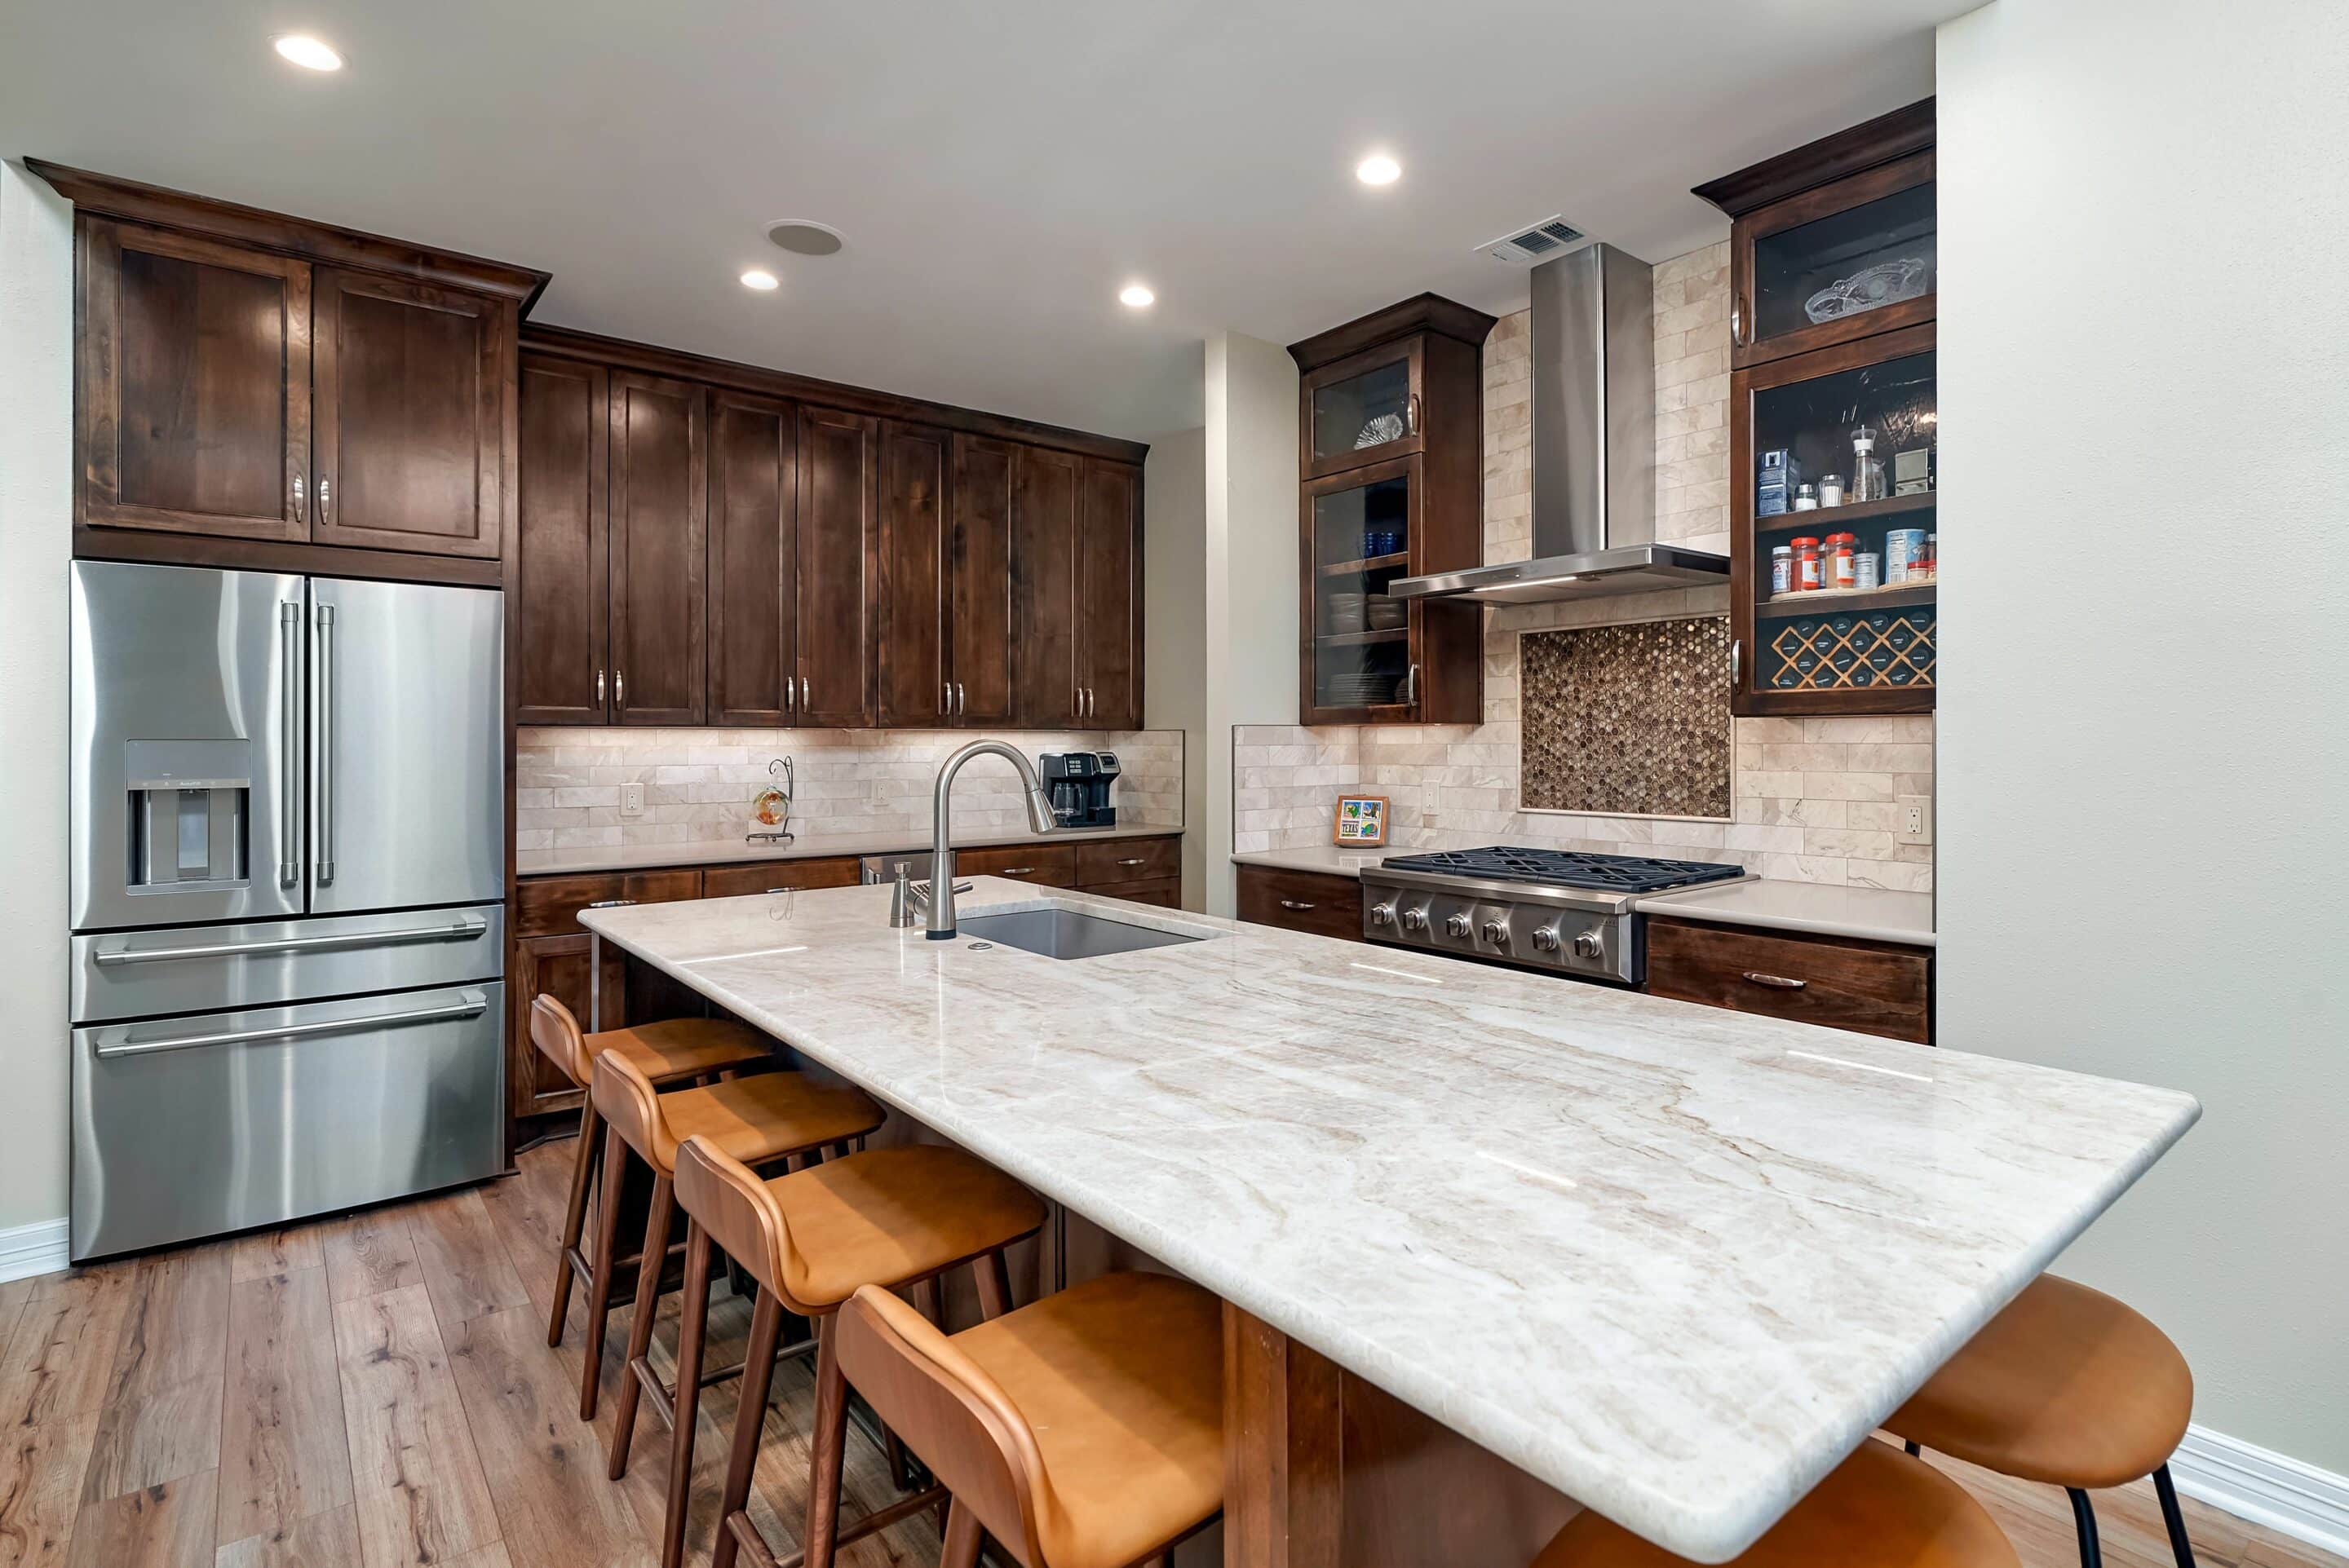 Solid Surface Countertop Trends for Kitchens in 2021